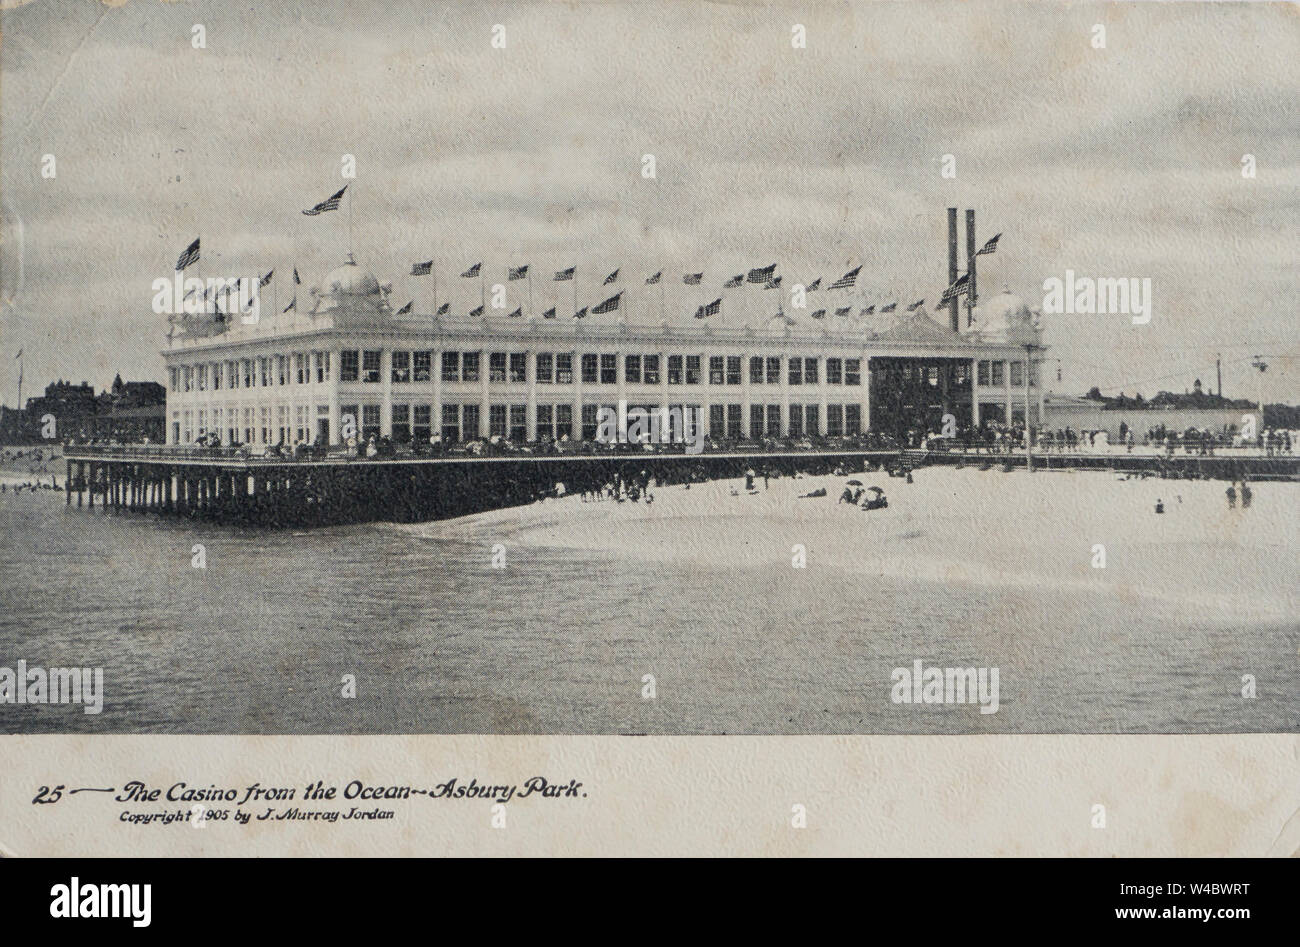 Postcard of the Casino in Asbury Park, Monmouth County New Jersey, USA, black and white photograph published in 1905 Stock Photo